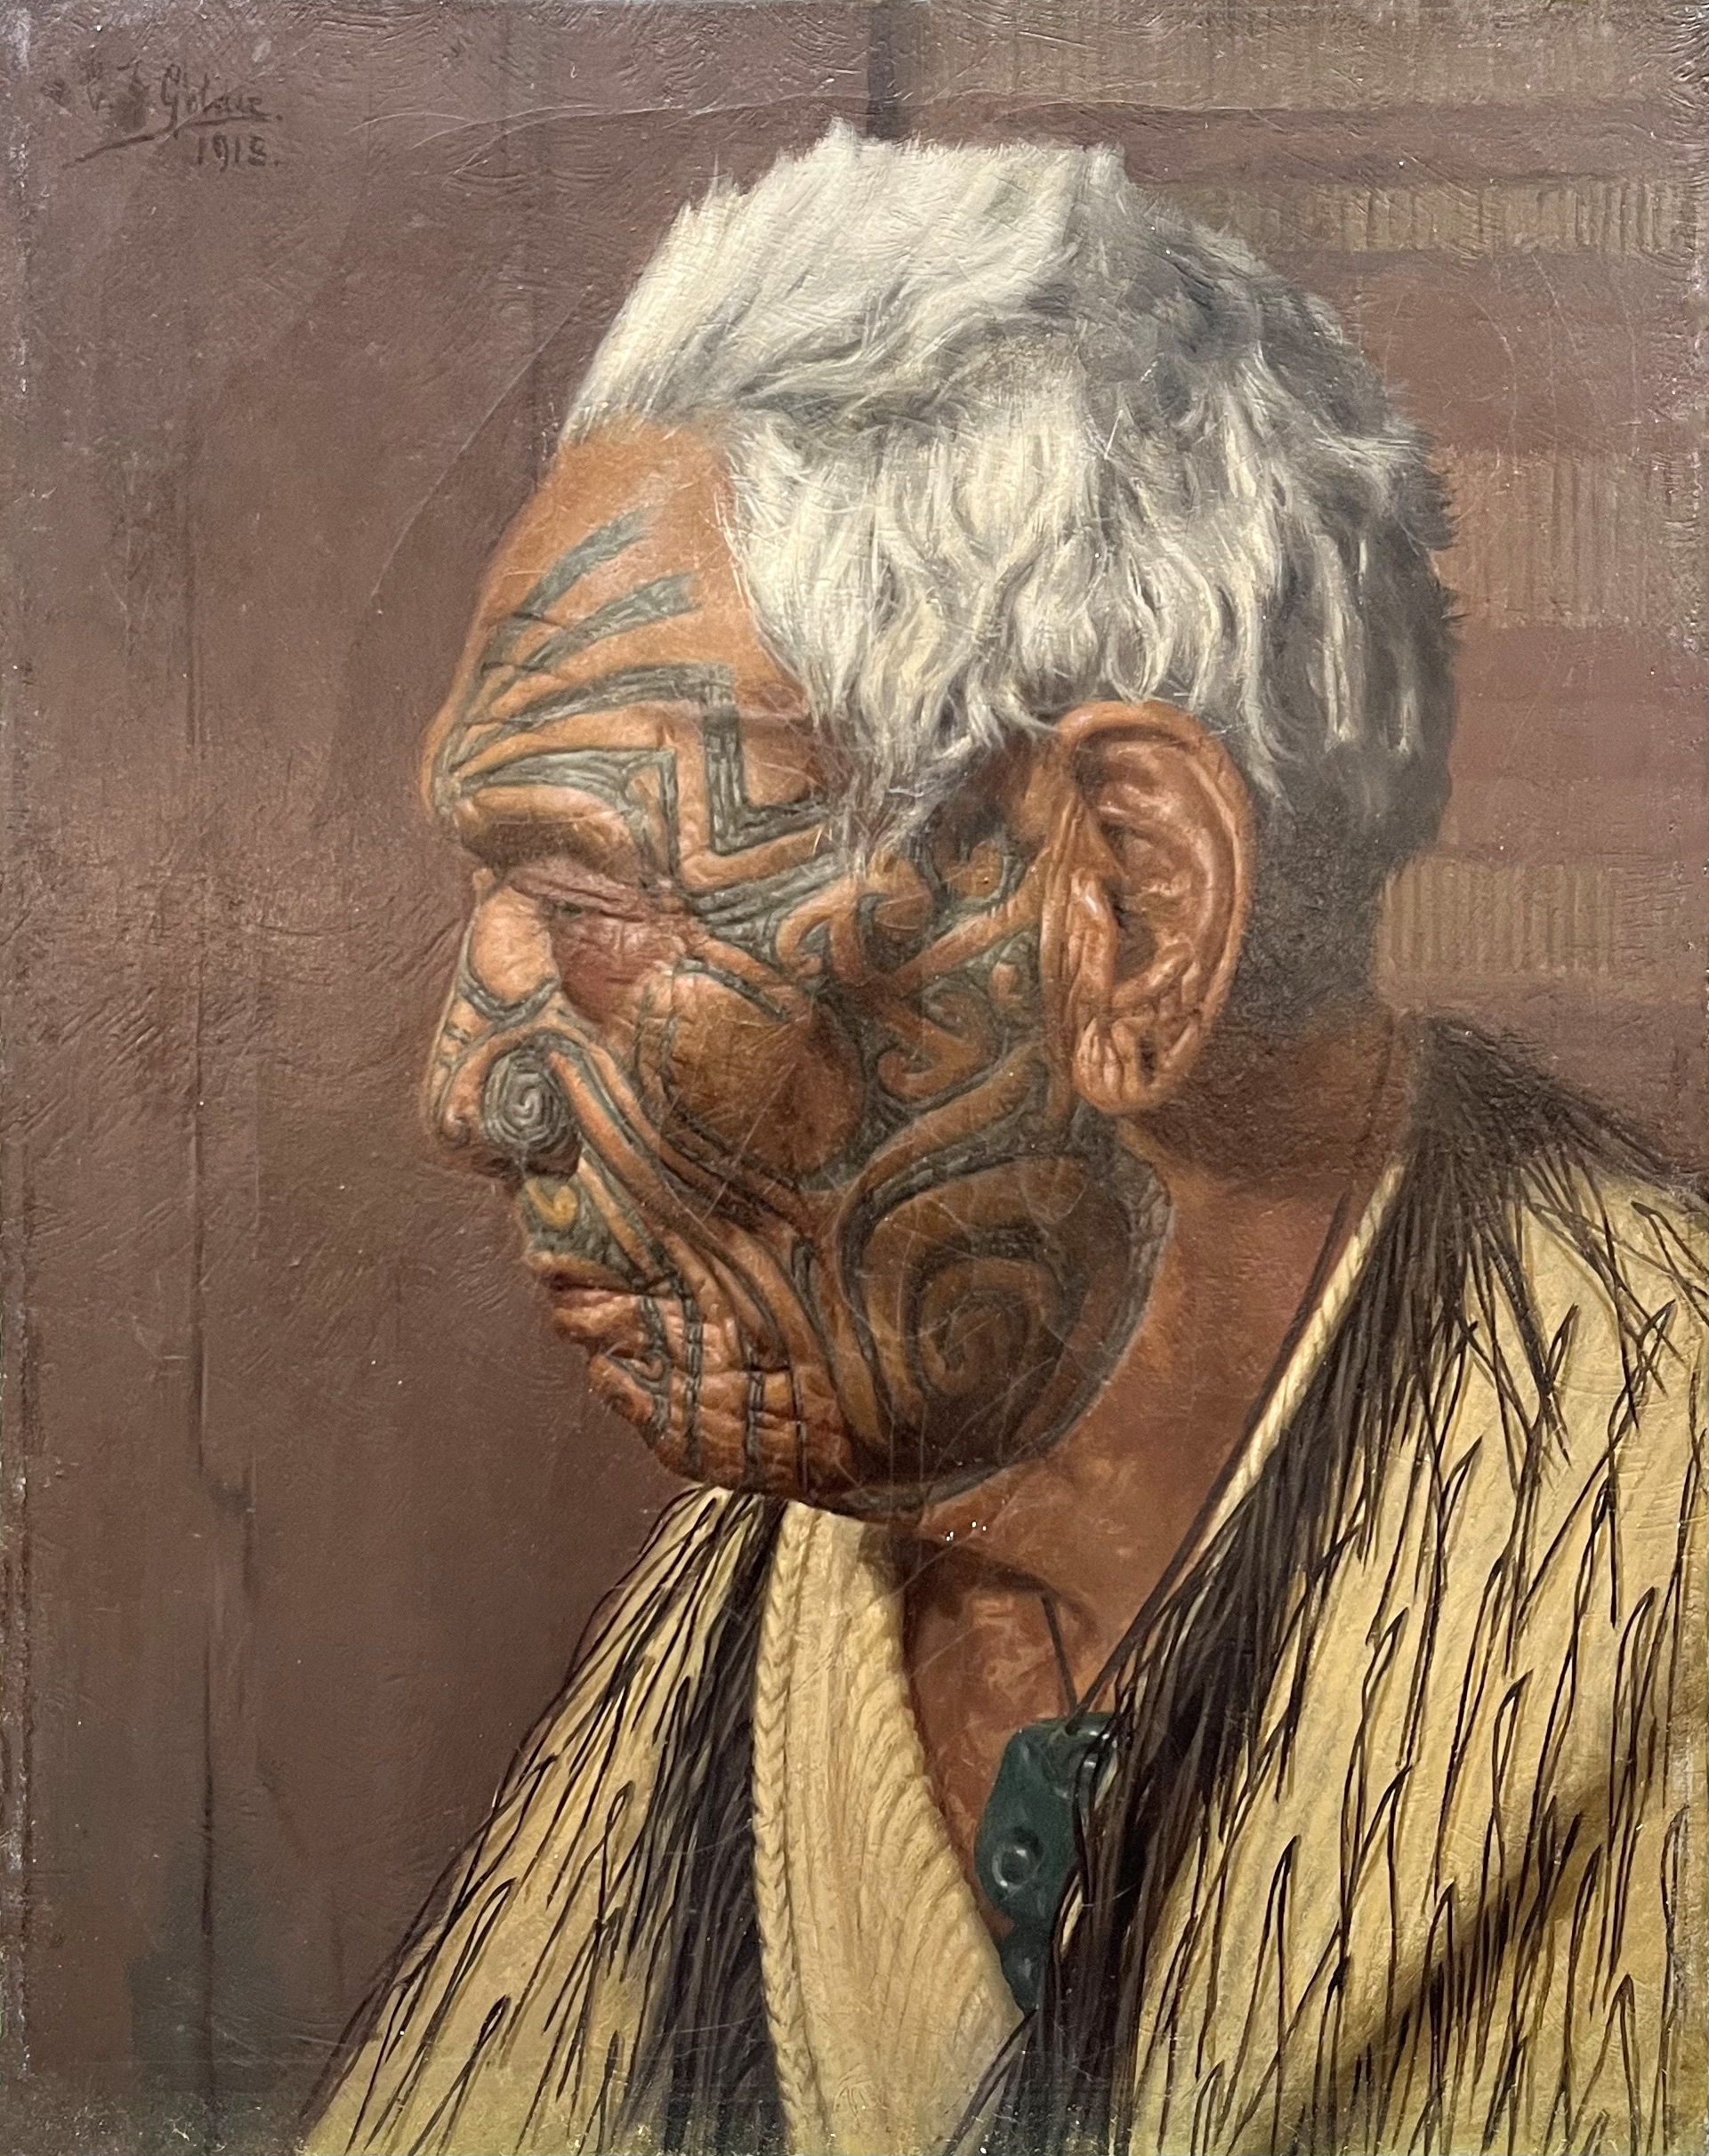 Artwork by Charles Frederick Goldie, CHARLES FREDERICK GOLDIE - The Calm Close of Valour’s Various Day
(A Portrait of Chief Wharekauri Tahuna), Made of Oil on canvas